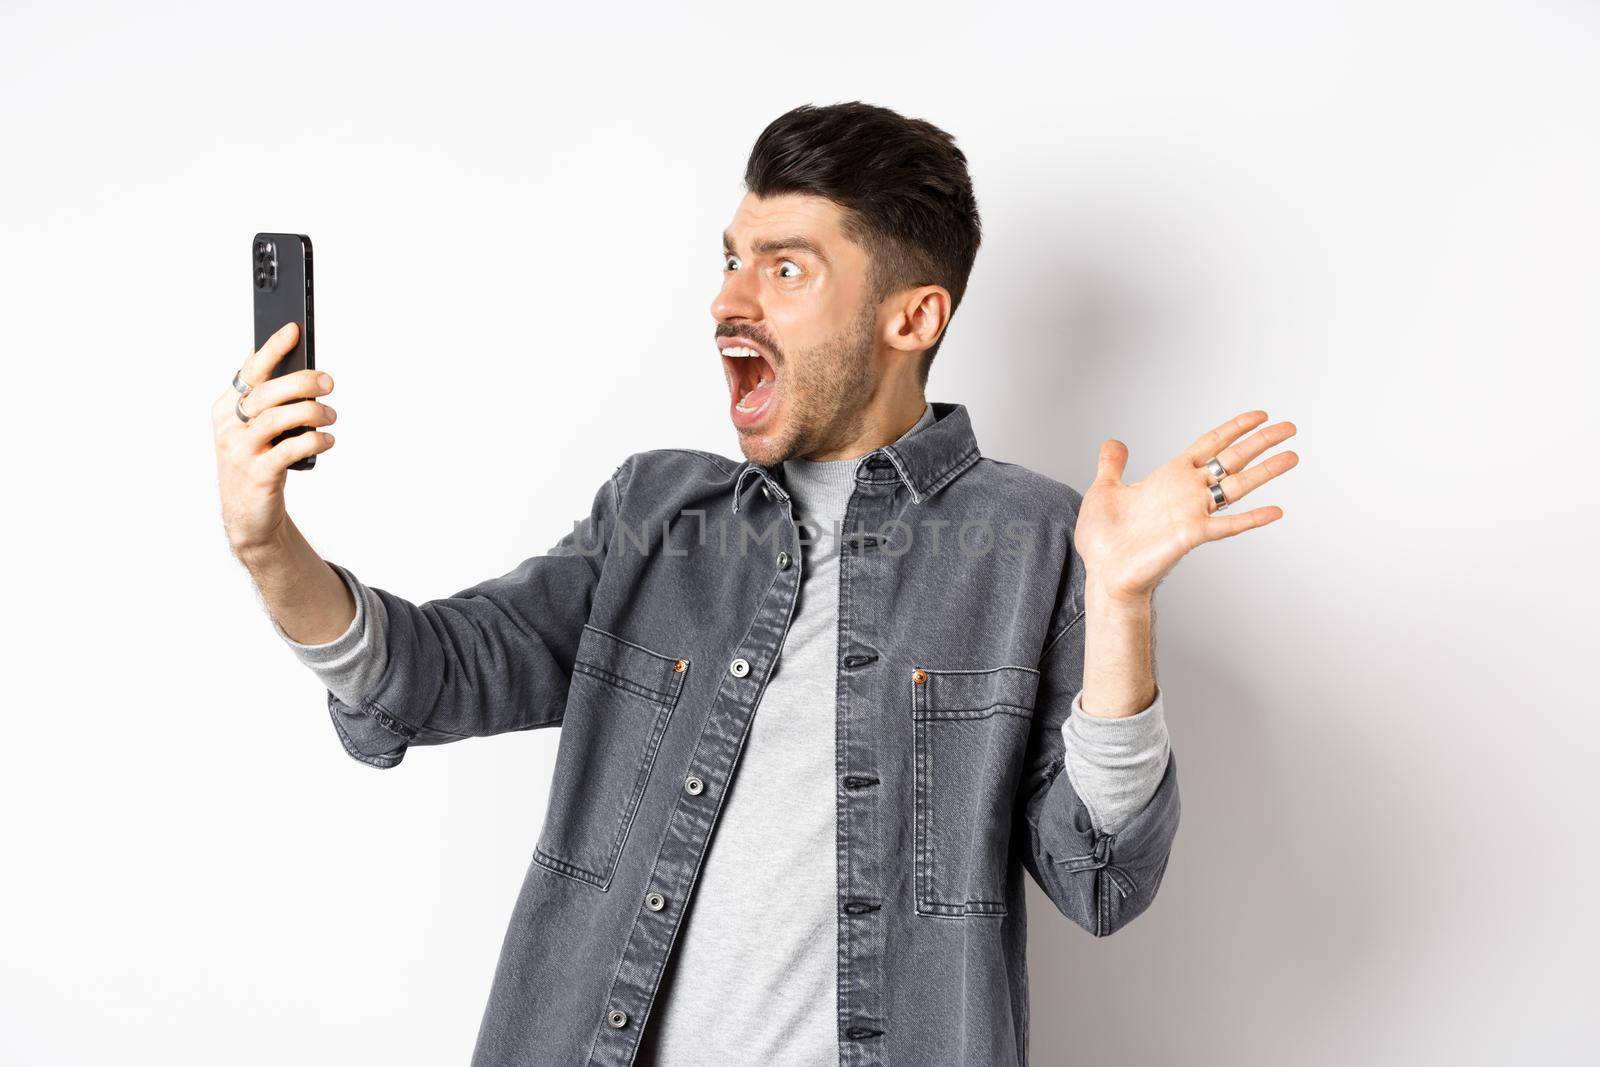 Shocked and confused man staring frustrated at smartphone screen, shouting from disappointment, standing against white background.